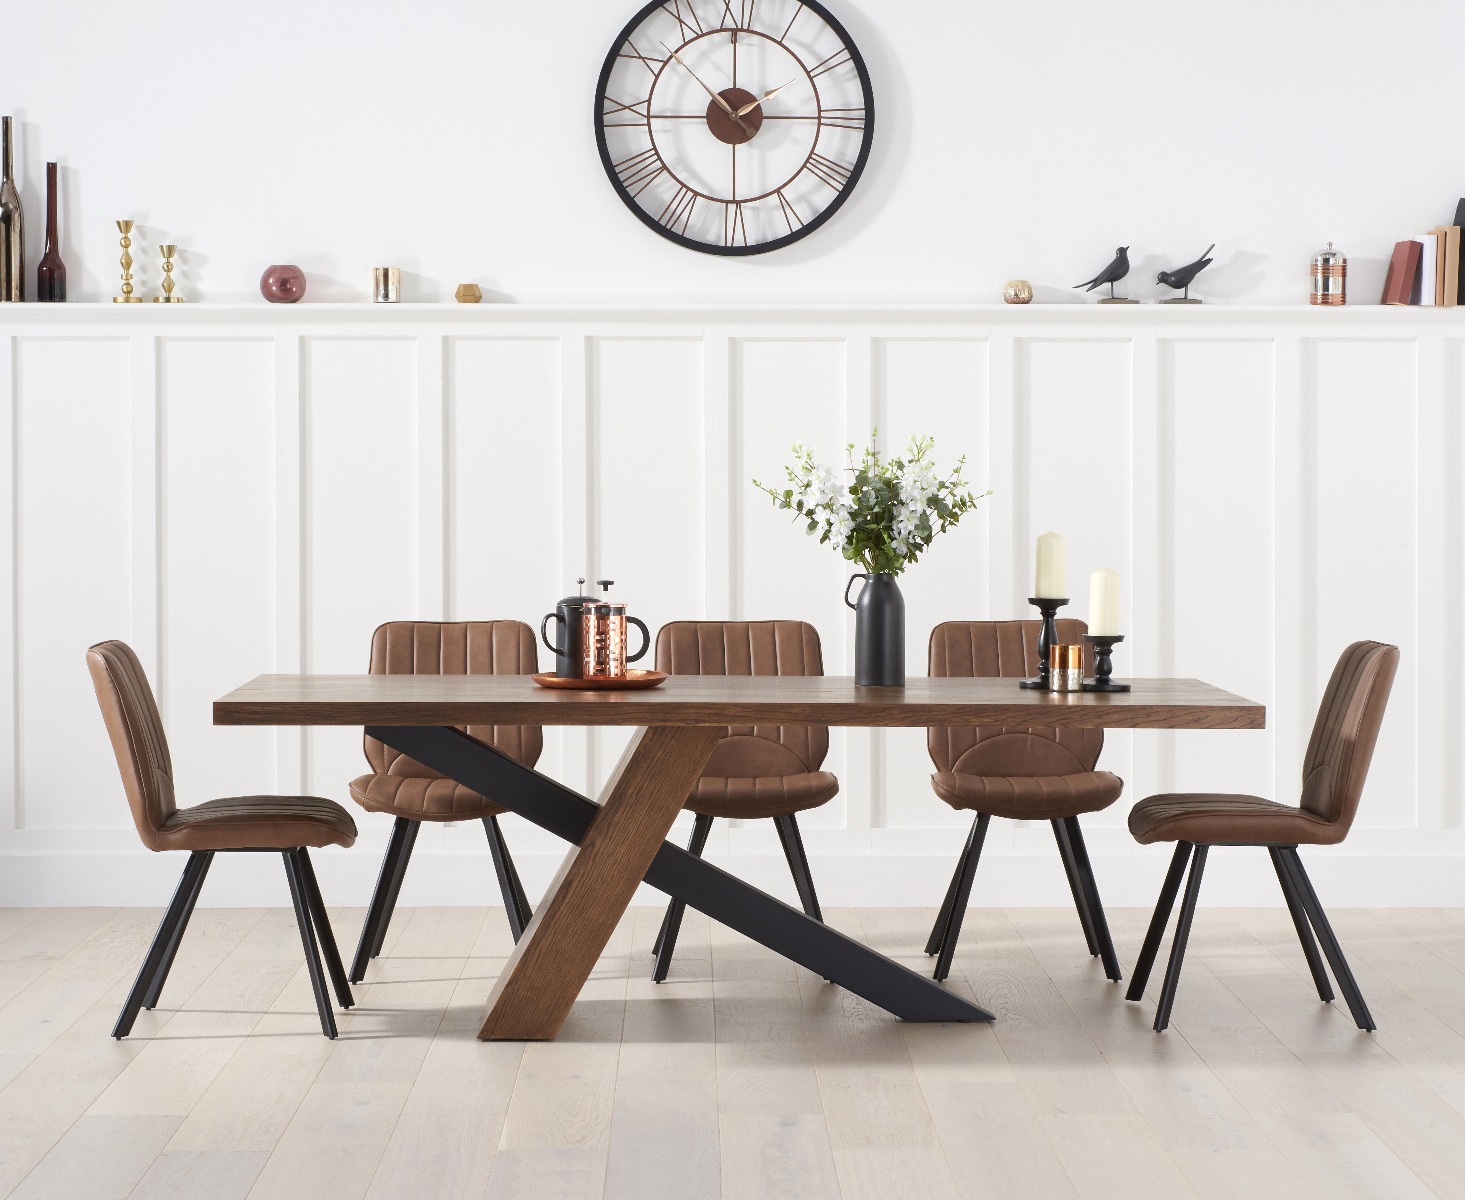 Michigan 180cm Black Leg Industrial Dining Table With 6 Brown Hendrick Faux Leather Dining Chairs